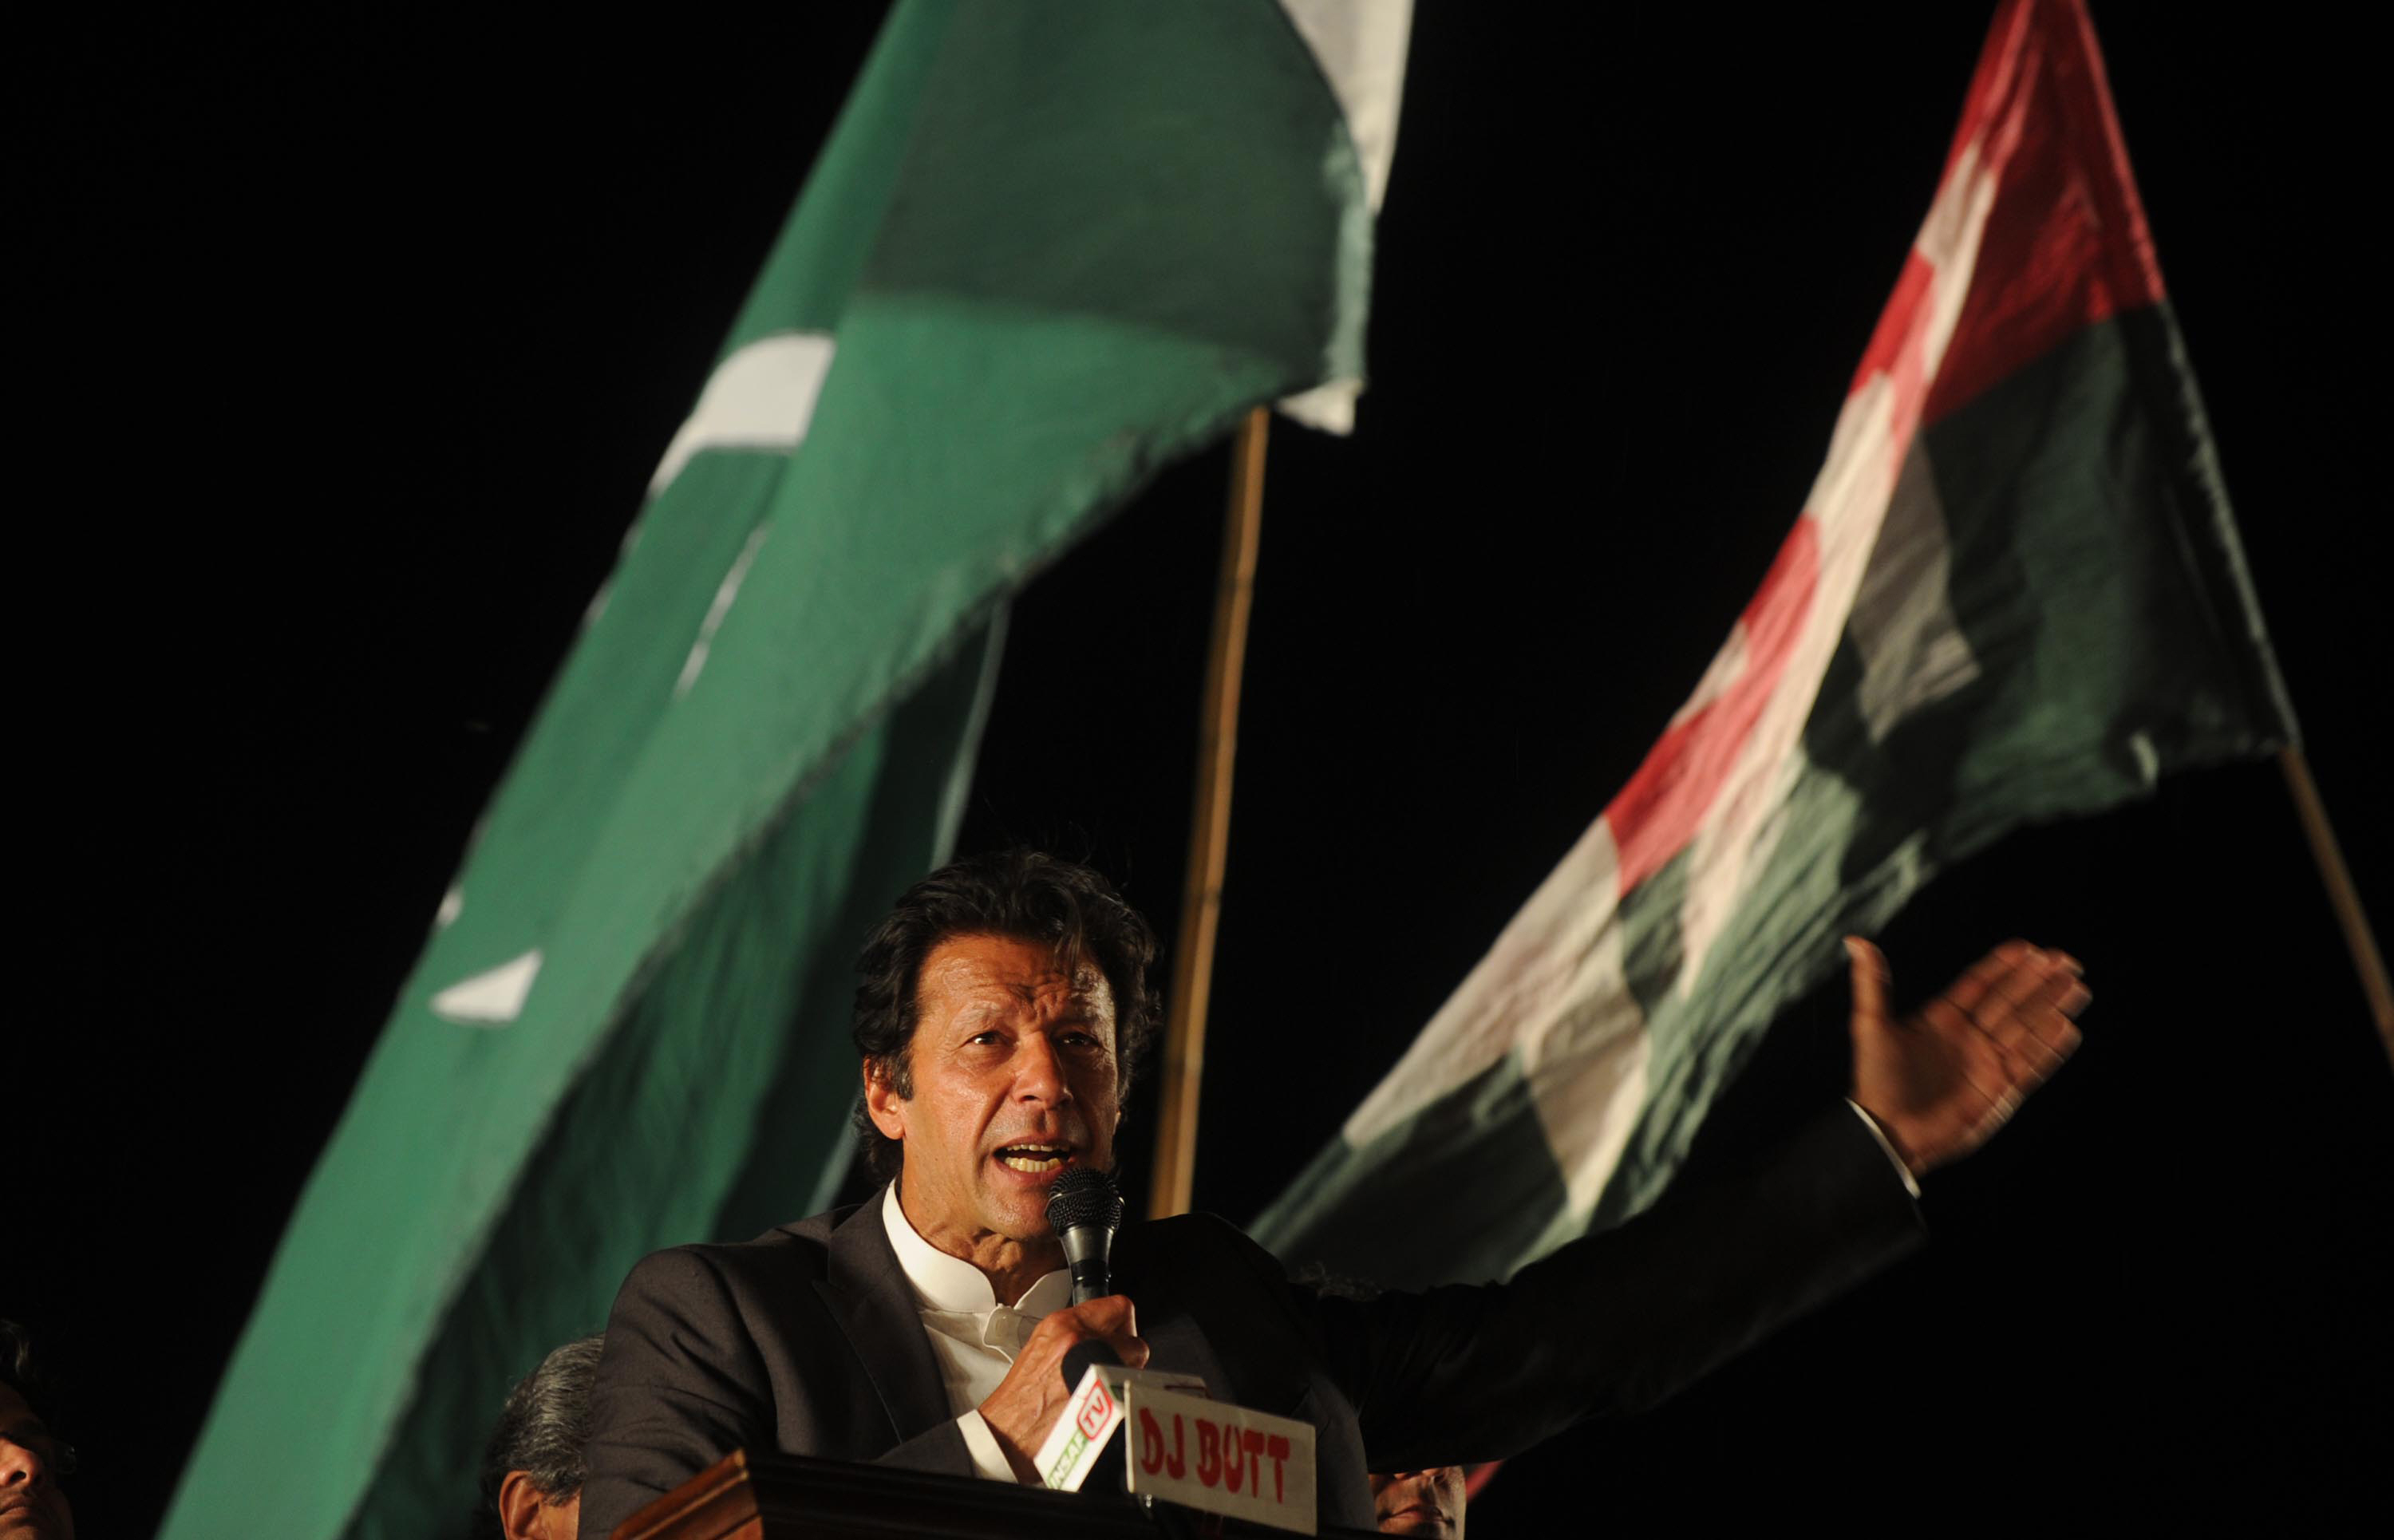 chairman pakistan tehreek e insaf imran khan gestures as he addressing a public meeting in lahore on march 23 2013 photo afp